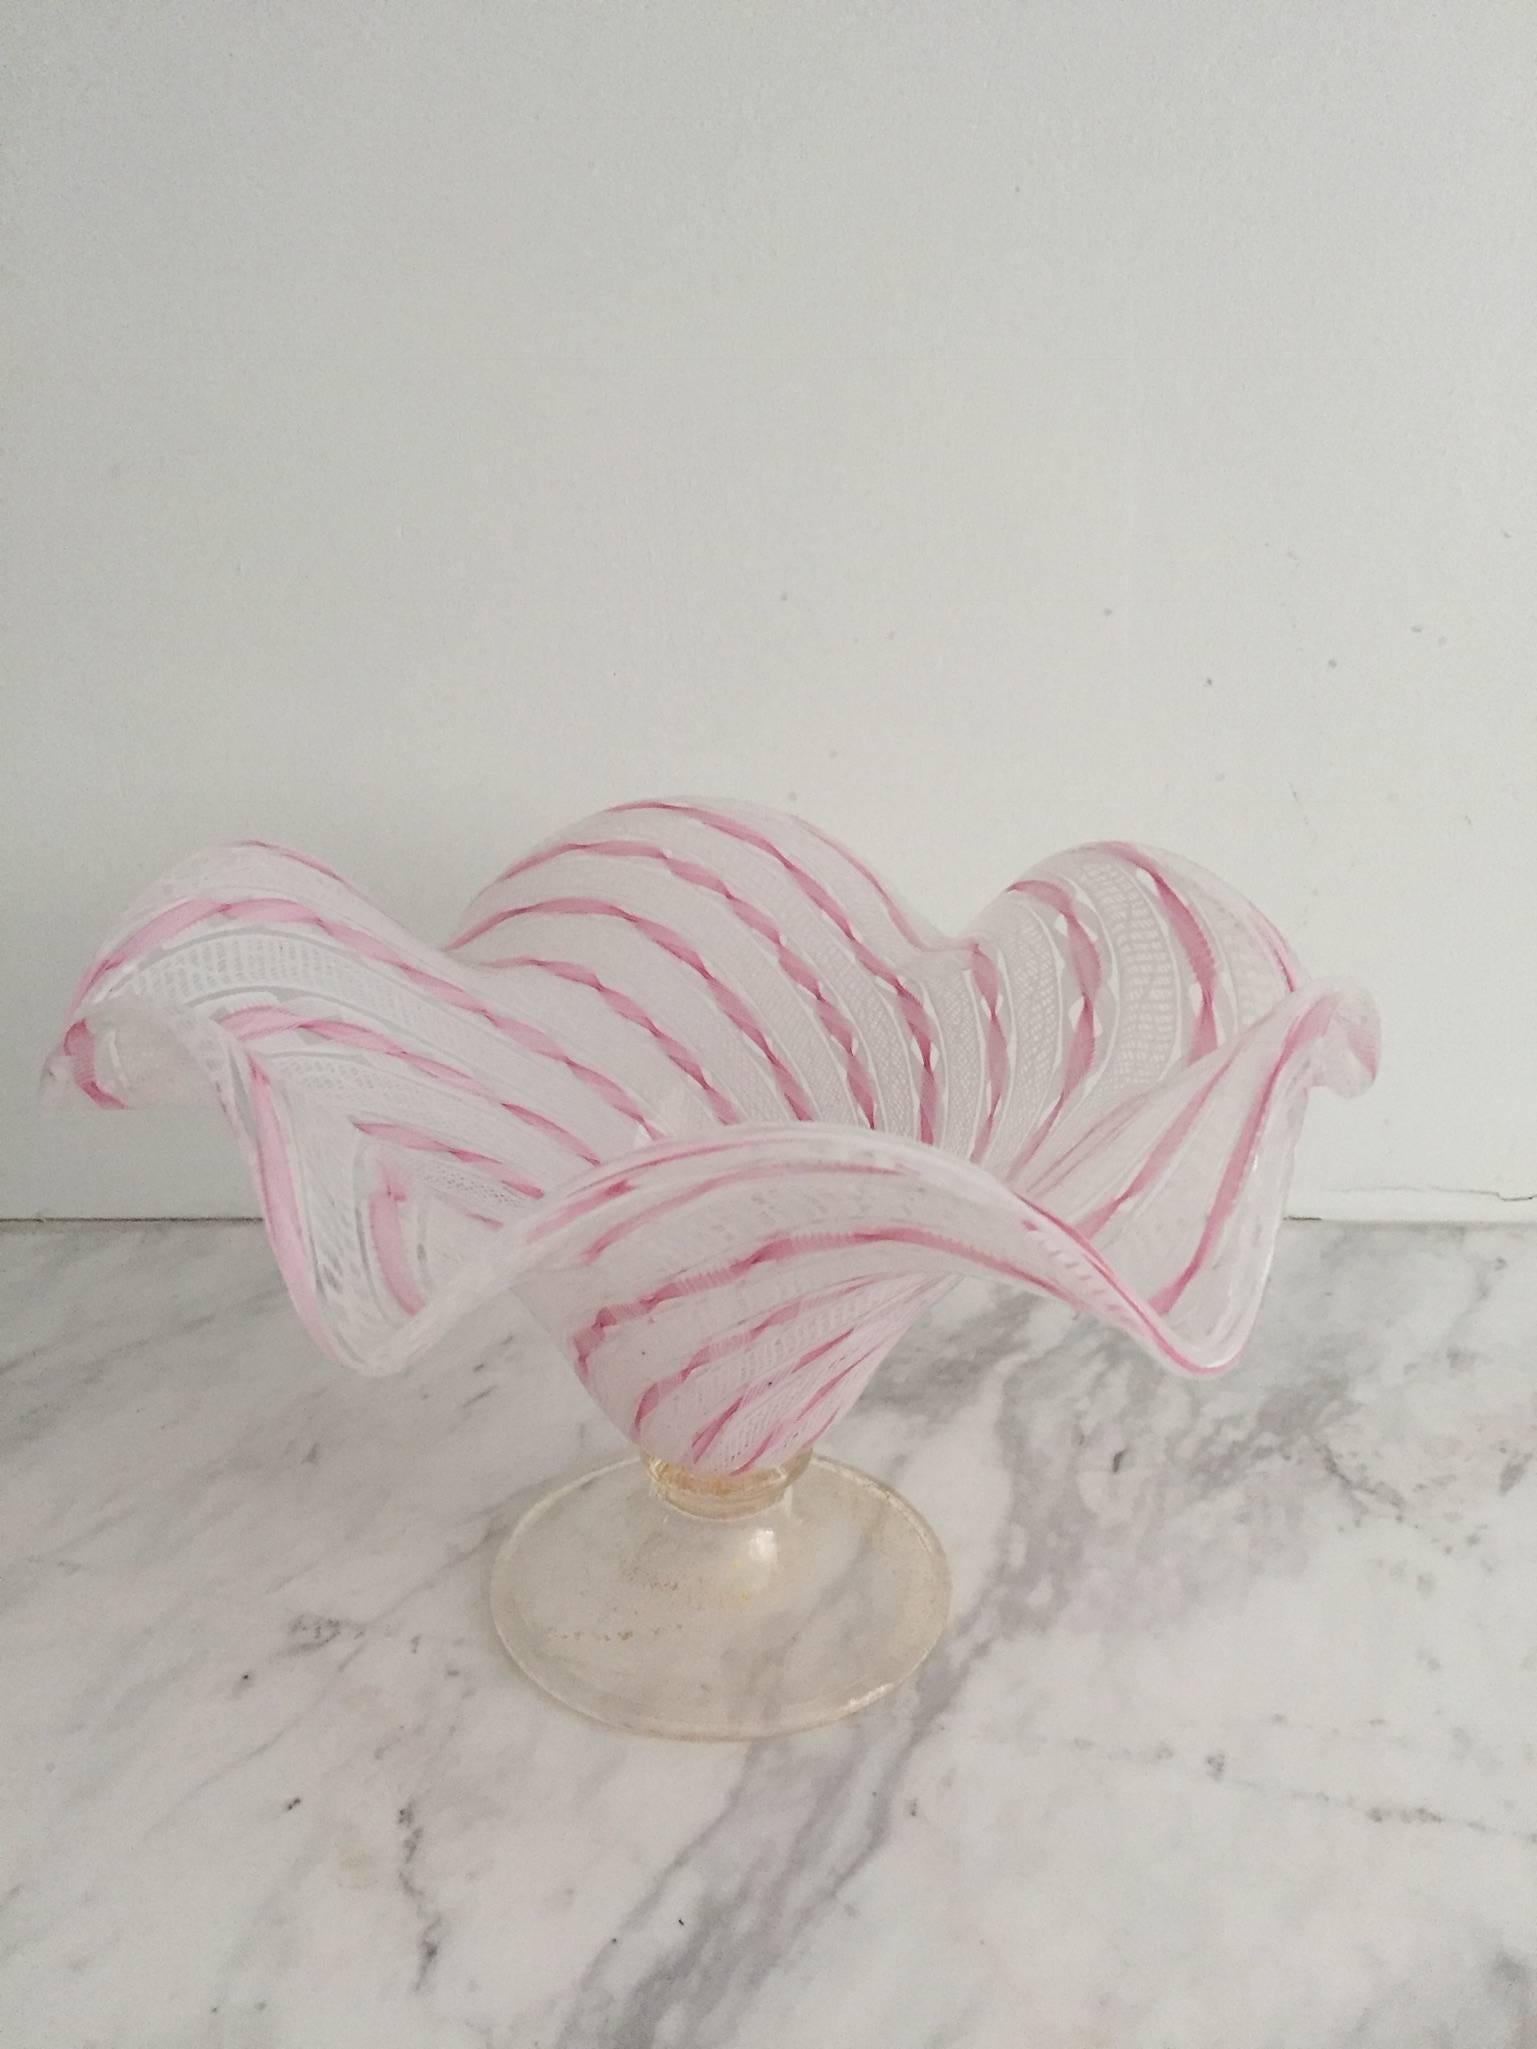 Beautiful Seguso handblown Murano glass scalloped-edge Latticino pedestal bowl in pink and white with a lot of gold flecking.